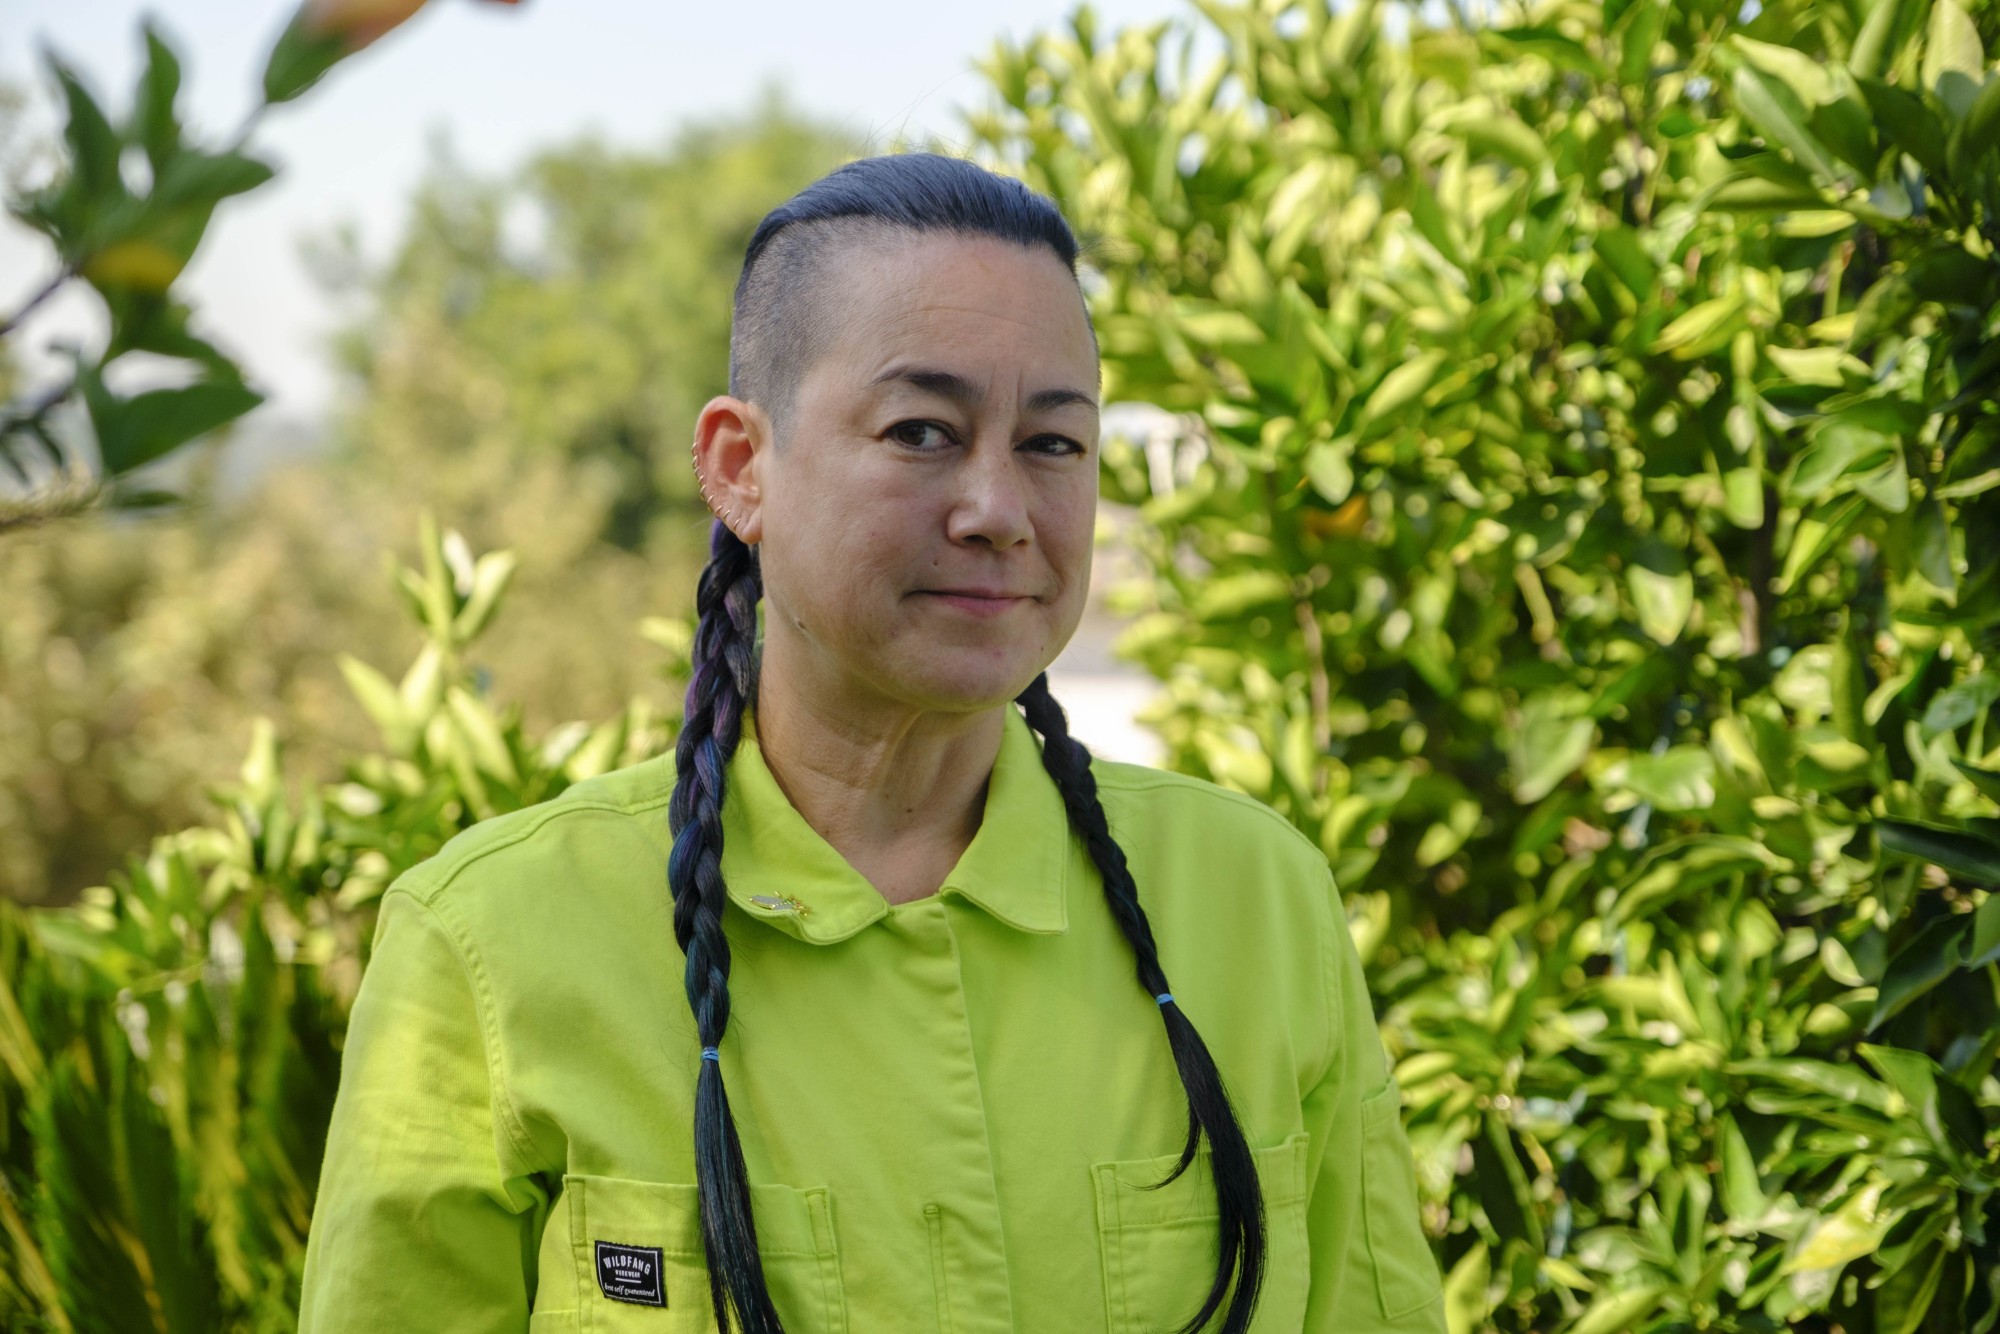 Genevieve Erin O’Brien wears a green button-up shirt, standing outside in front of many green plants. Their hair is shaved on the sides, with two long braids hanging over their shoulders